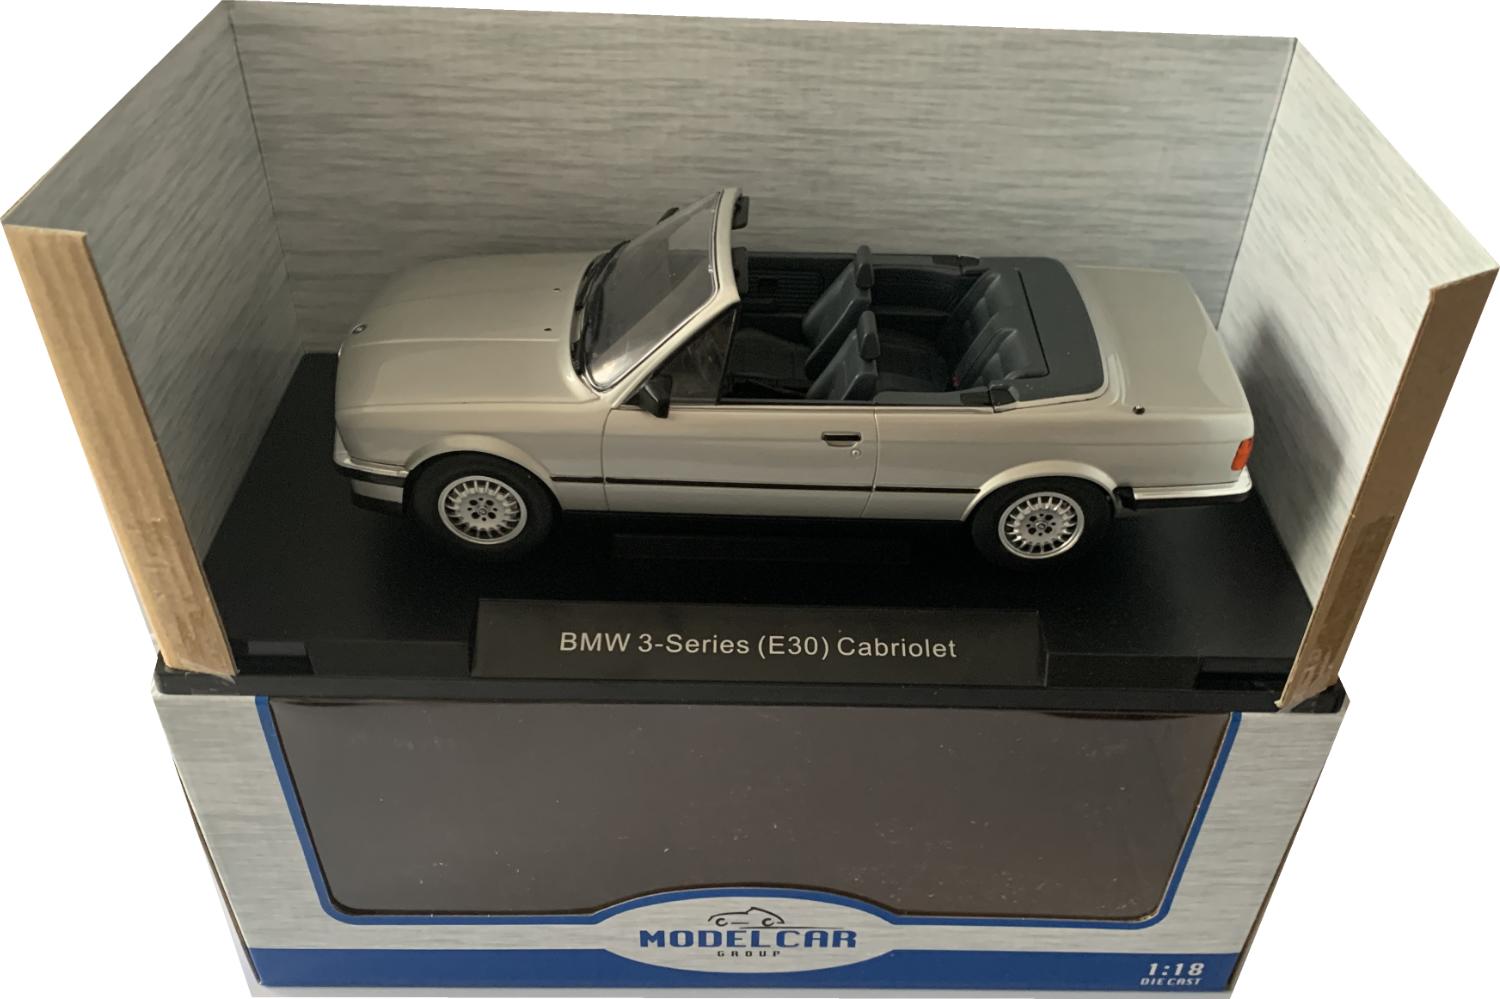 An excellent scale model of the BMW 3 Series with high level of detail throughout, all authentically recreated. Model is presented in a window display box.